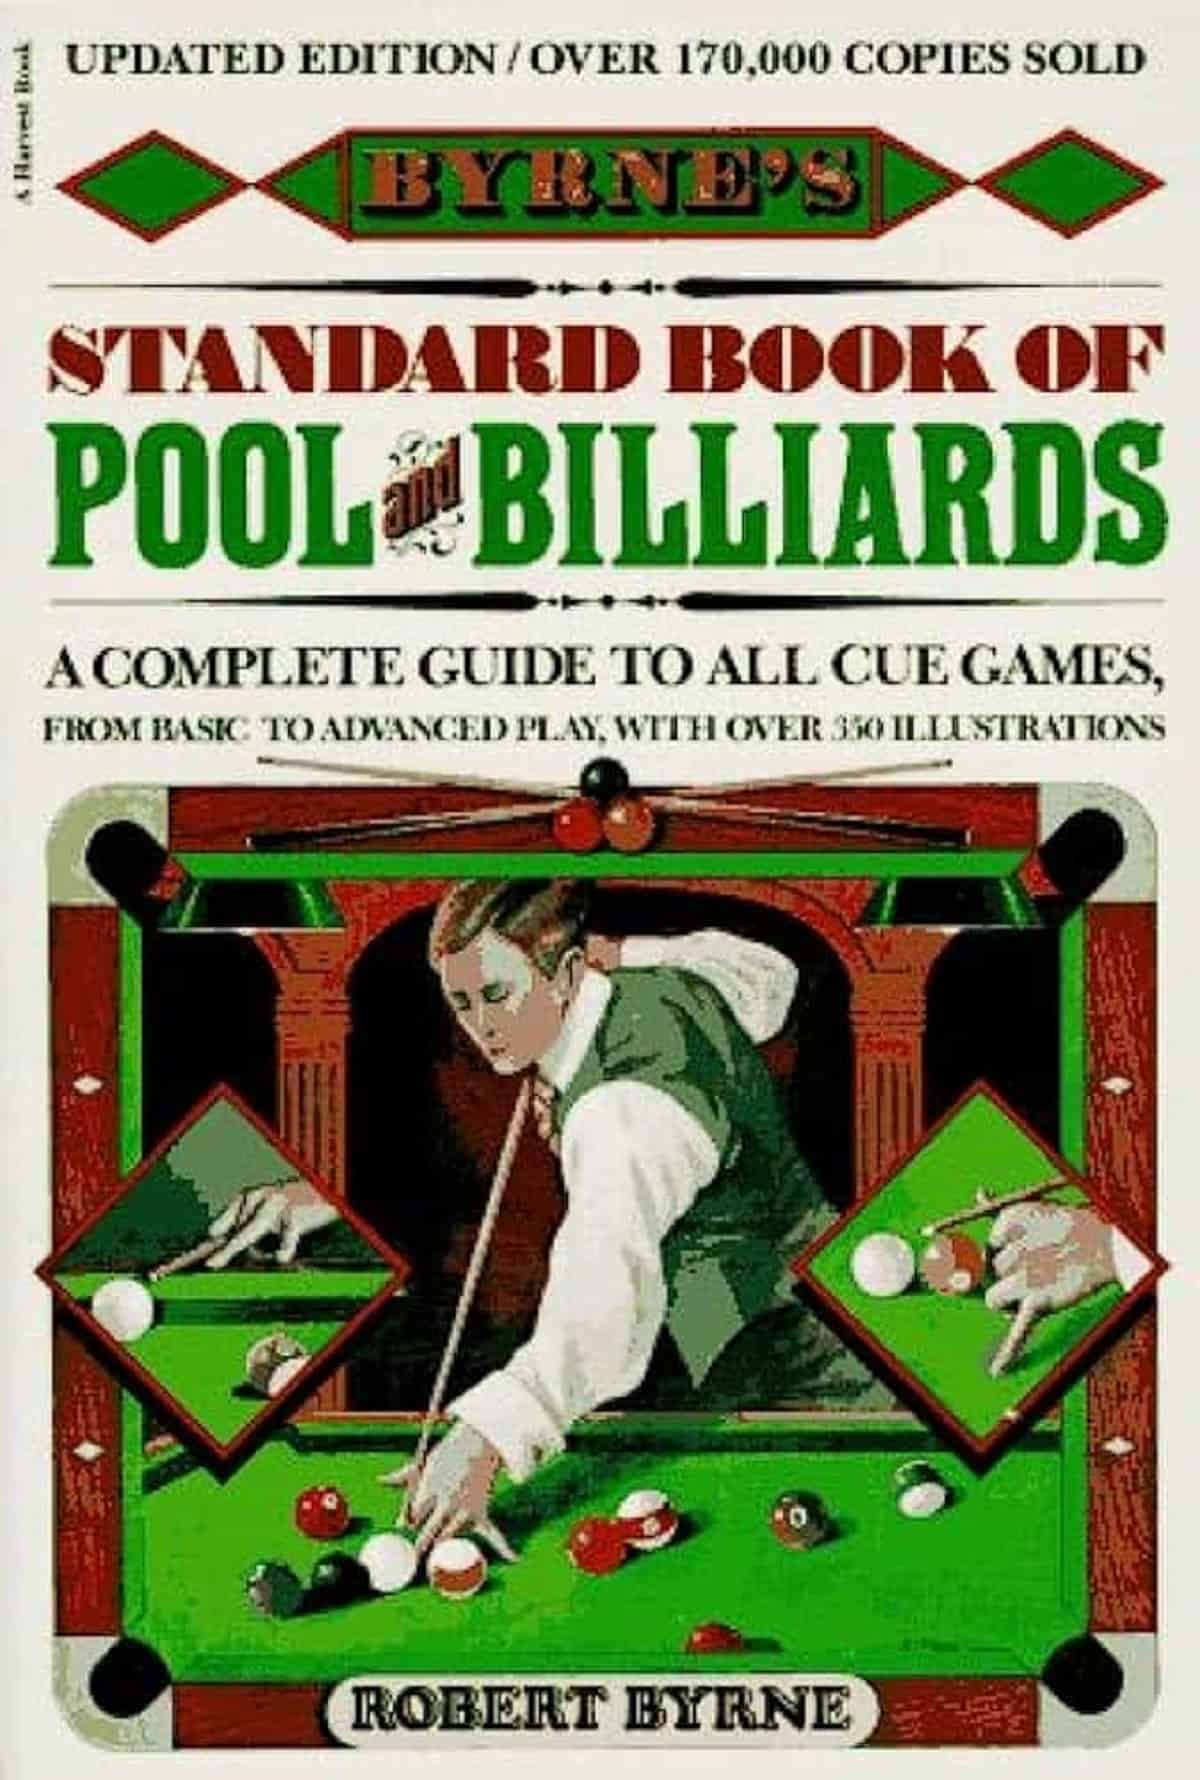 Review Byrne's Standard Book of Pool and Billiards